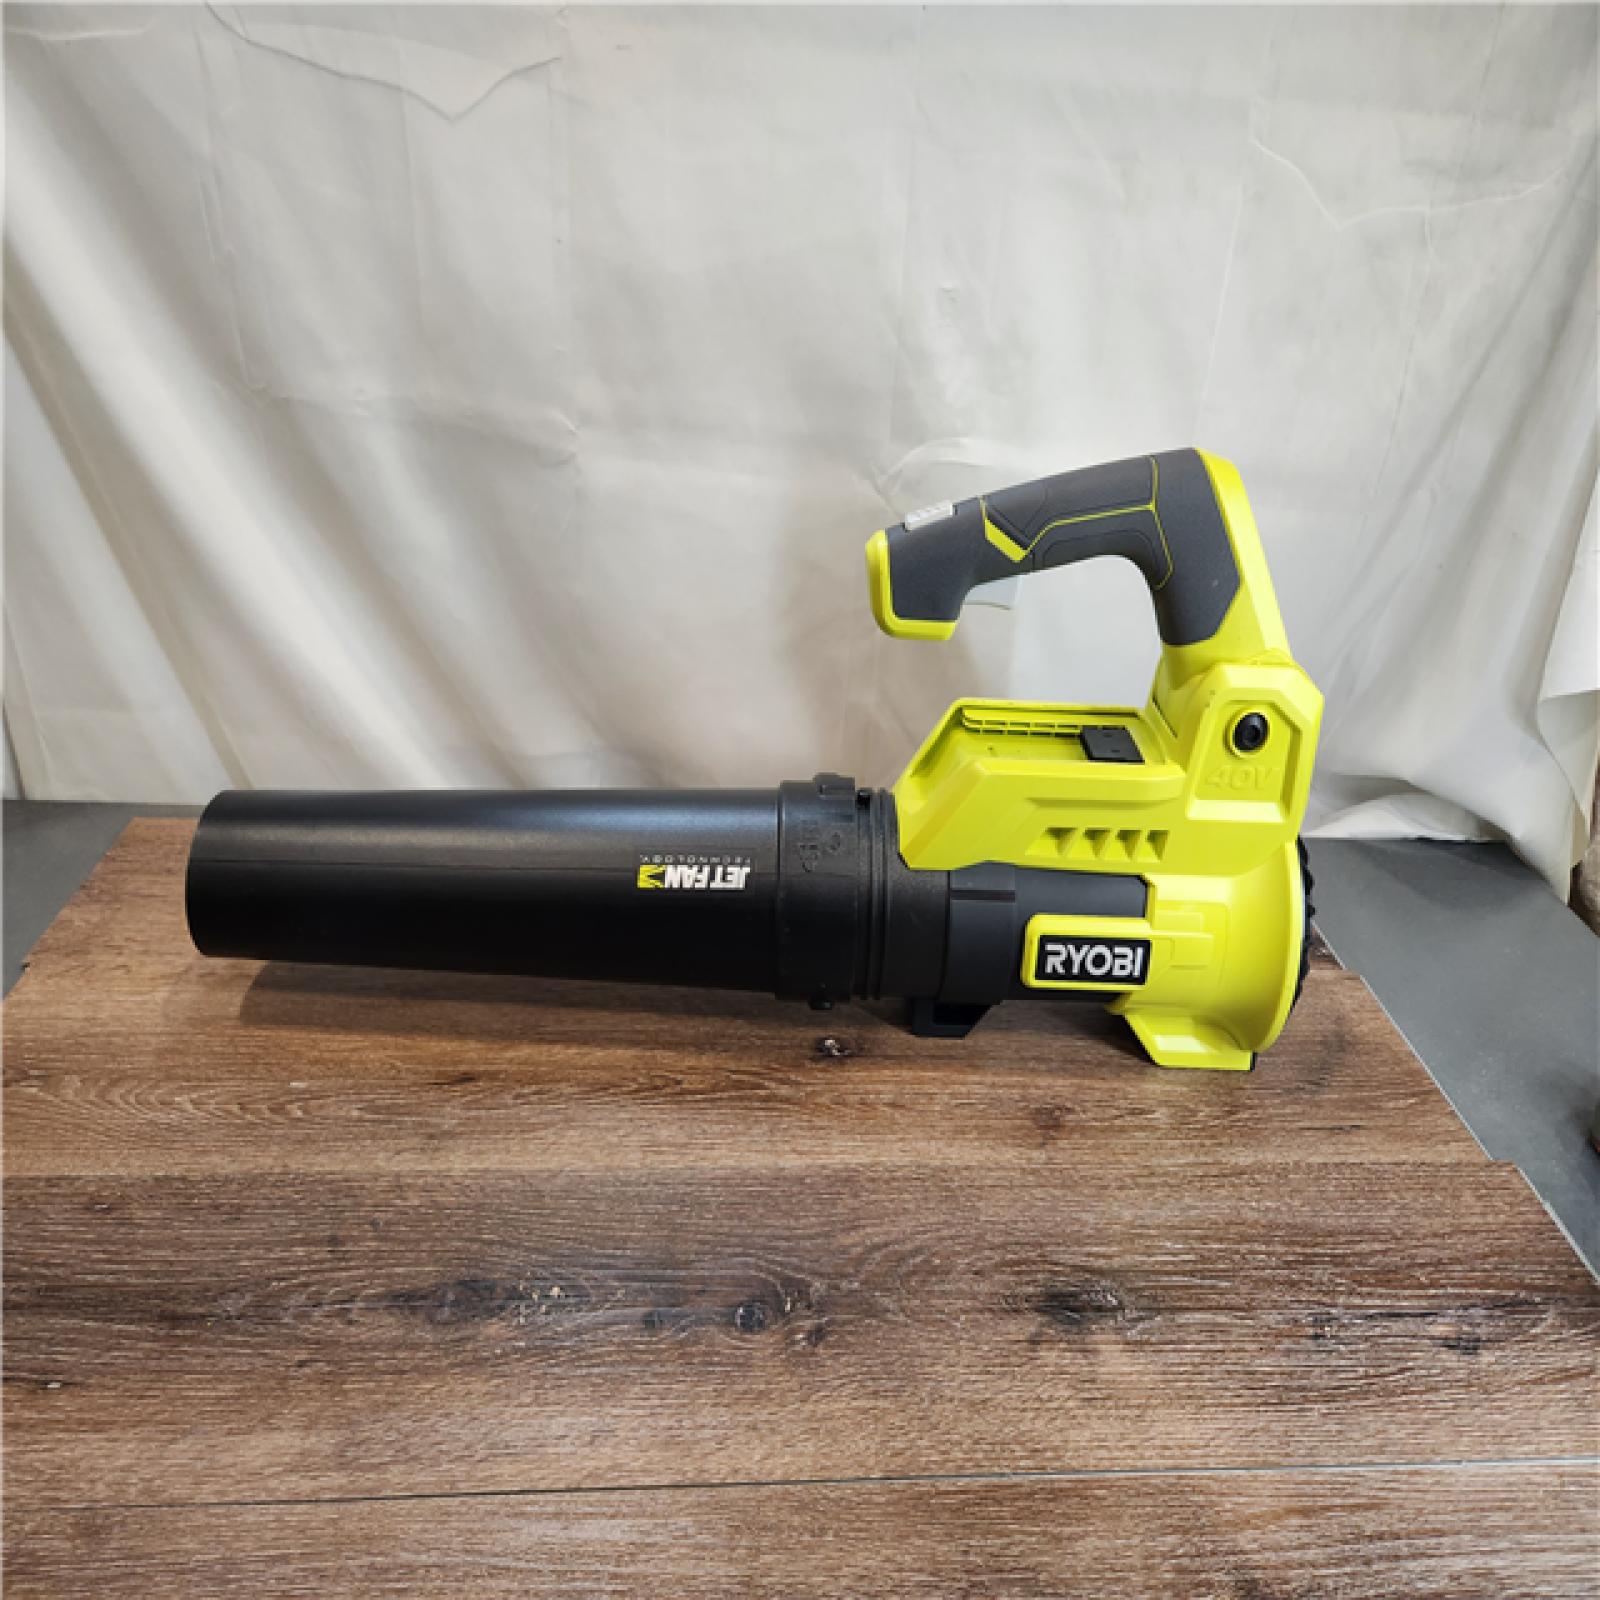 AS-IS RYOBI 40V 110 MPH 525 CFM Cordless Battery Variable-Speed Jet Fan Leaf Blower with 4.0 Battery and Charger